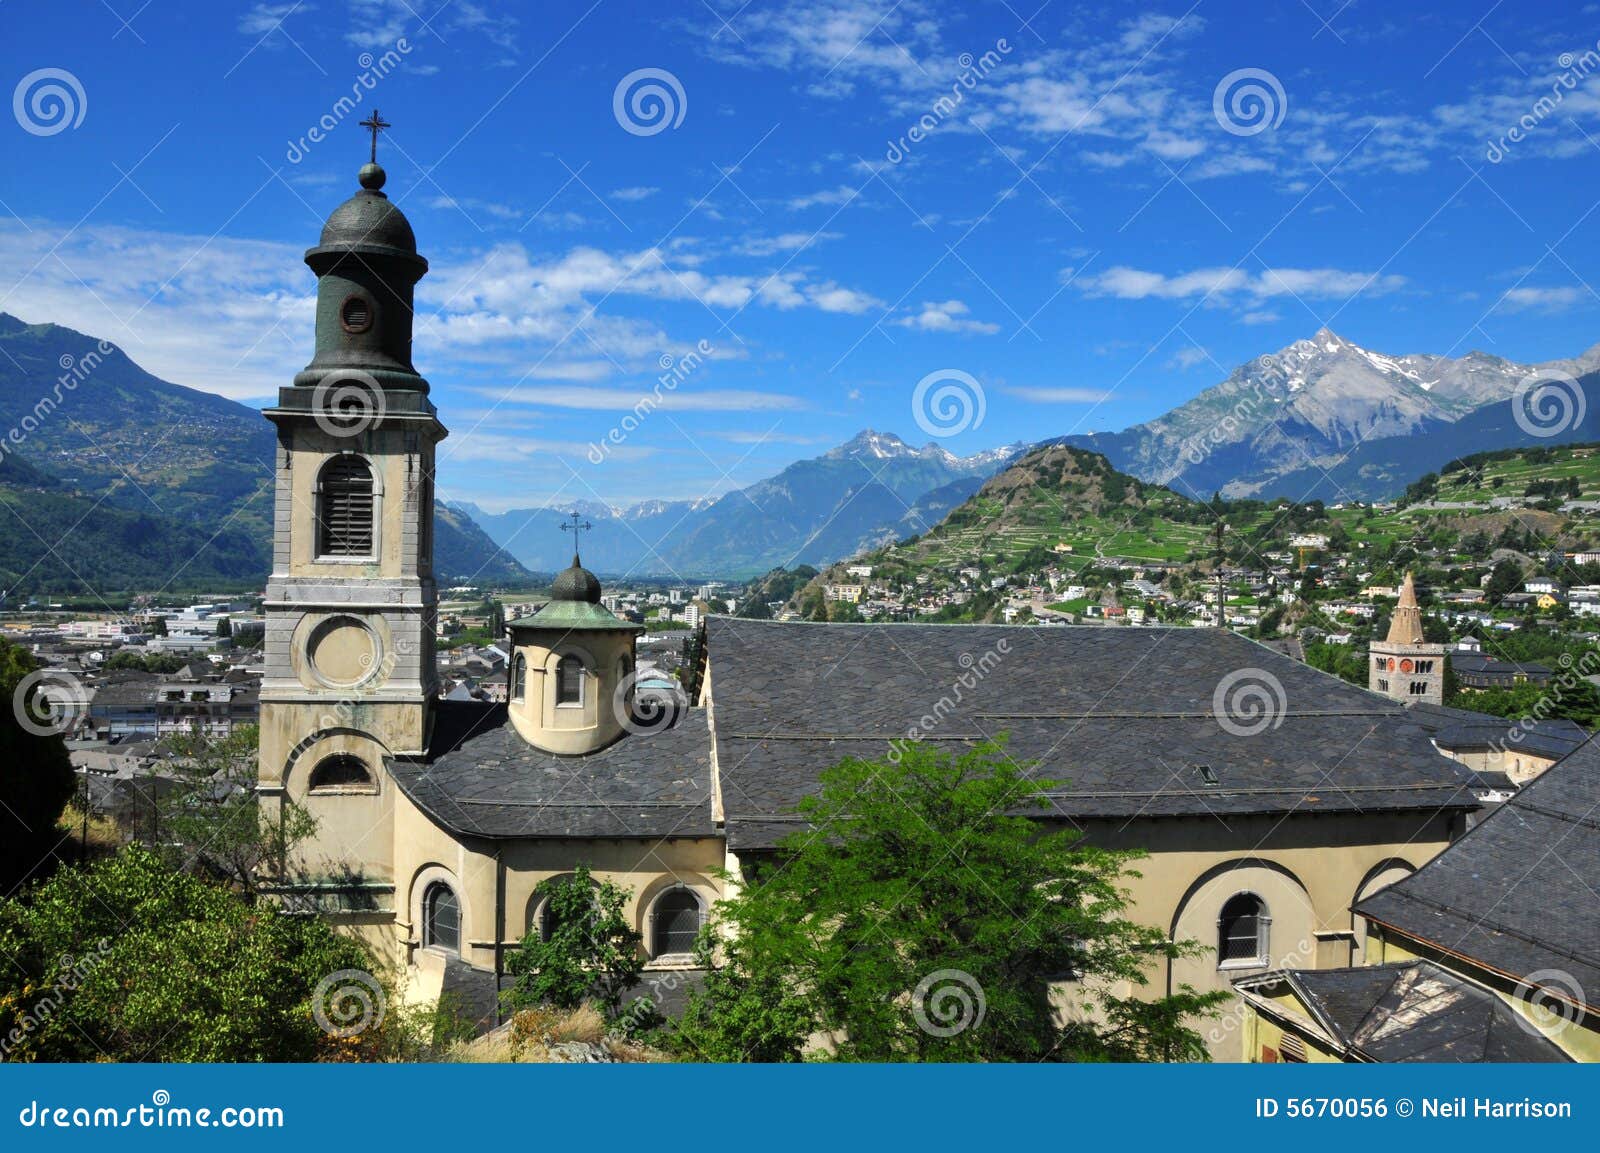 view over church in old town of sion